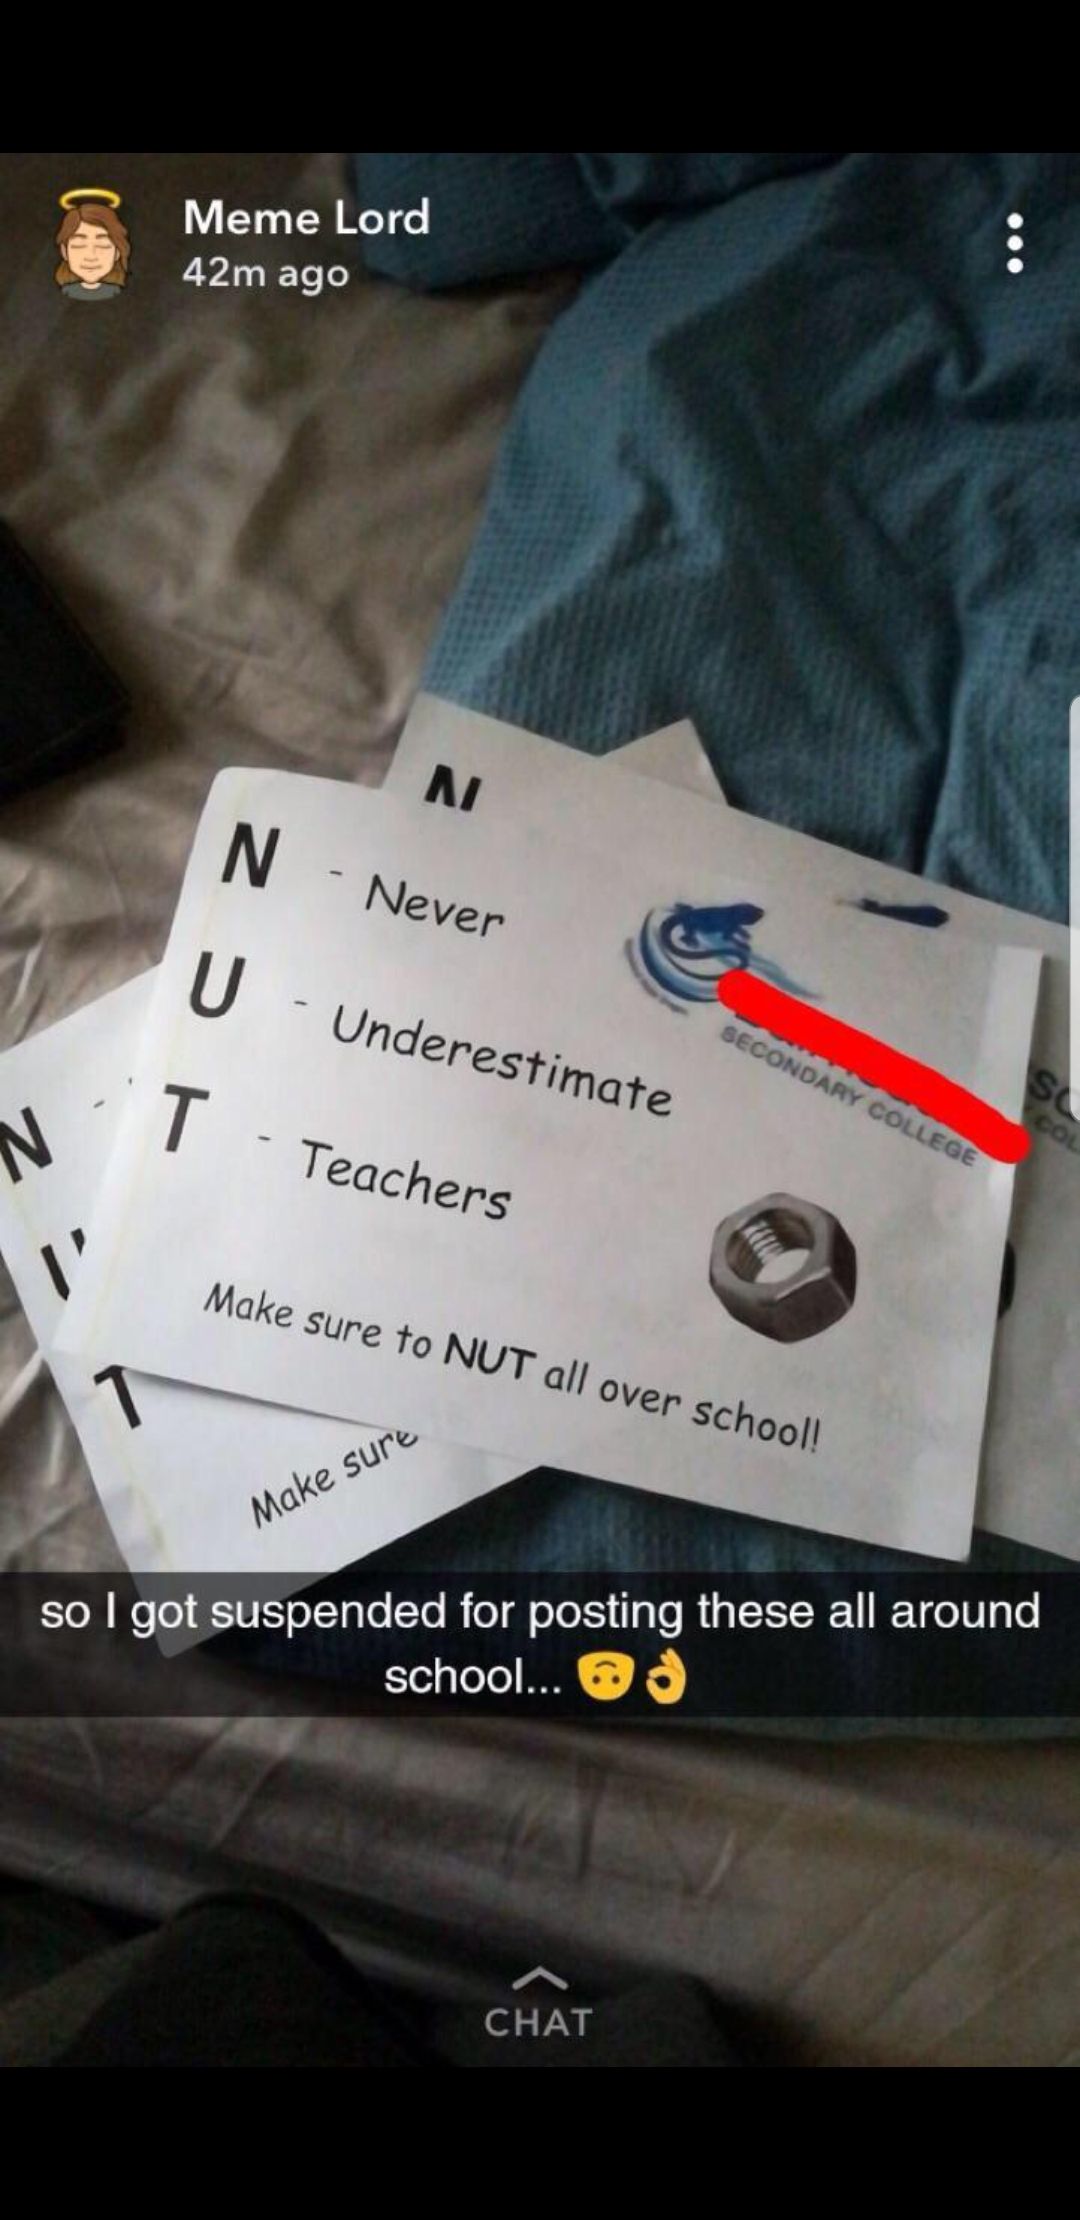 Remember to NUT all over your school